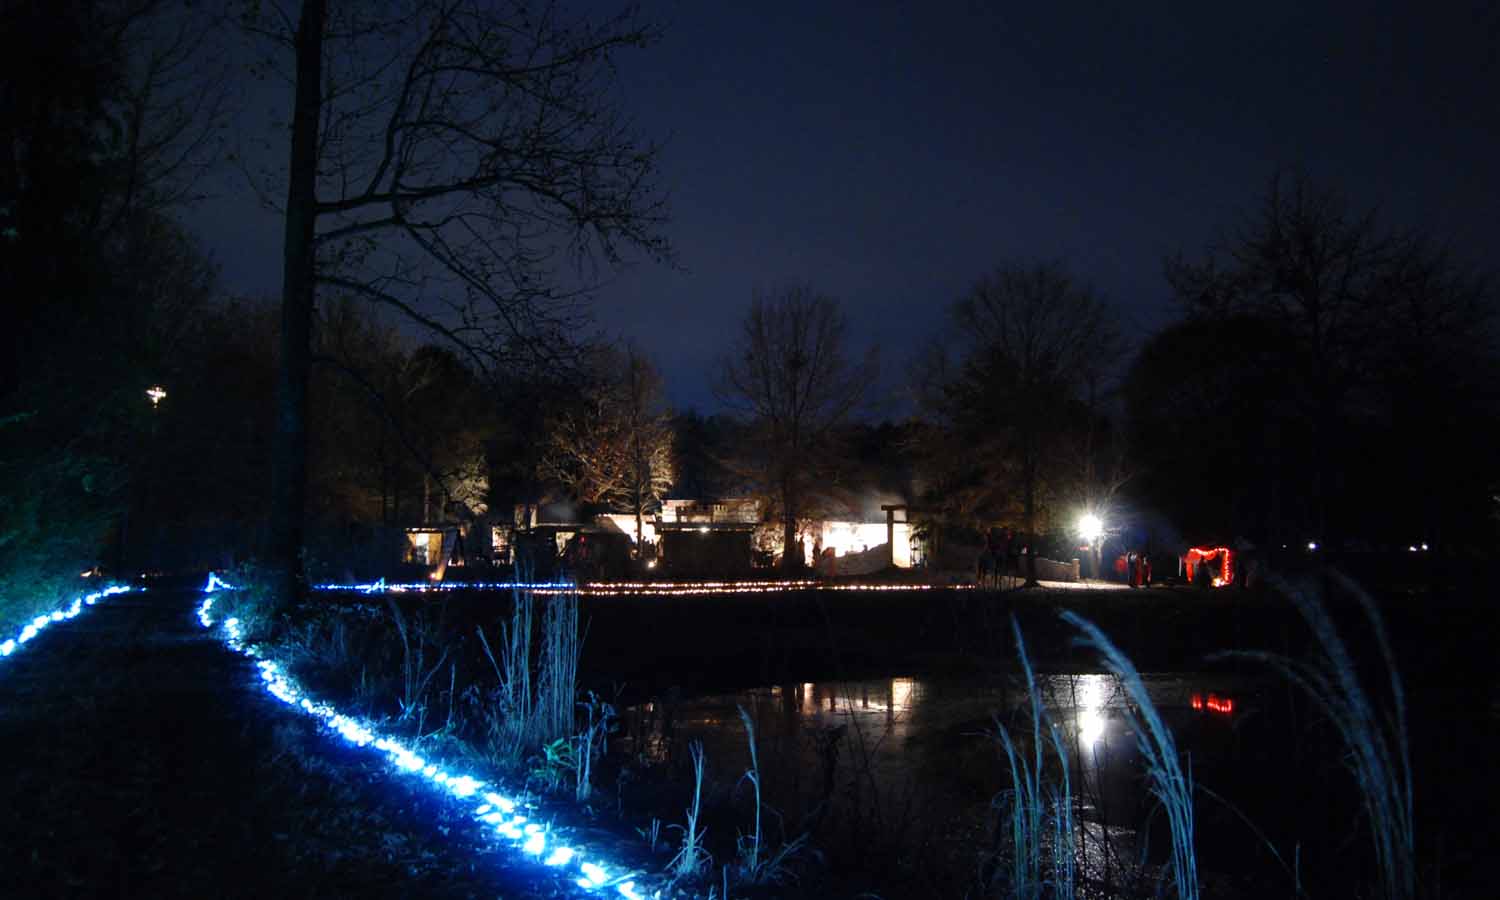 View of the village from the lighted path